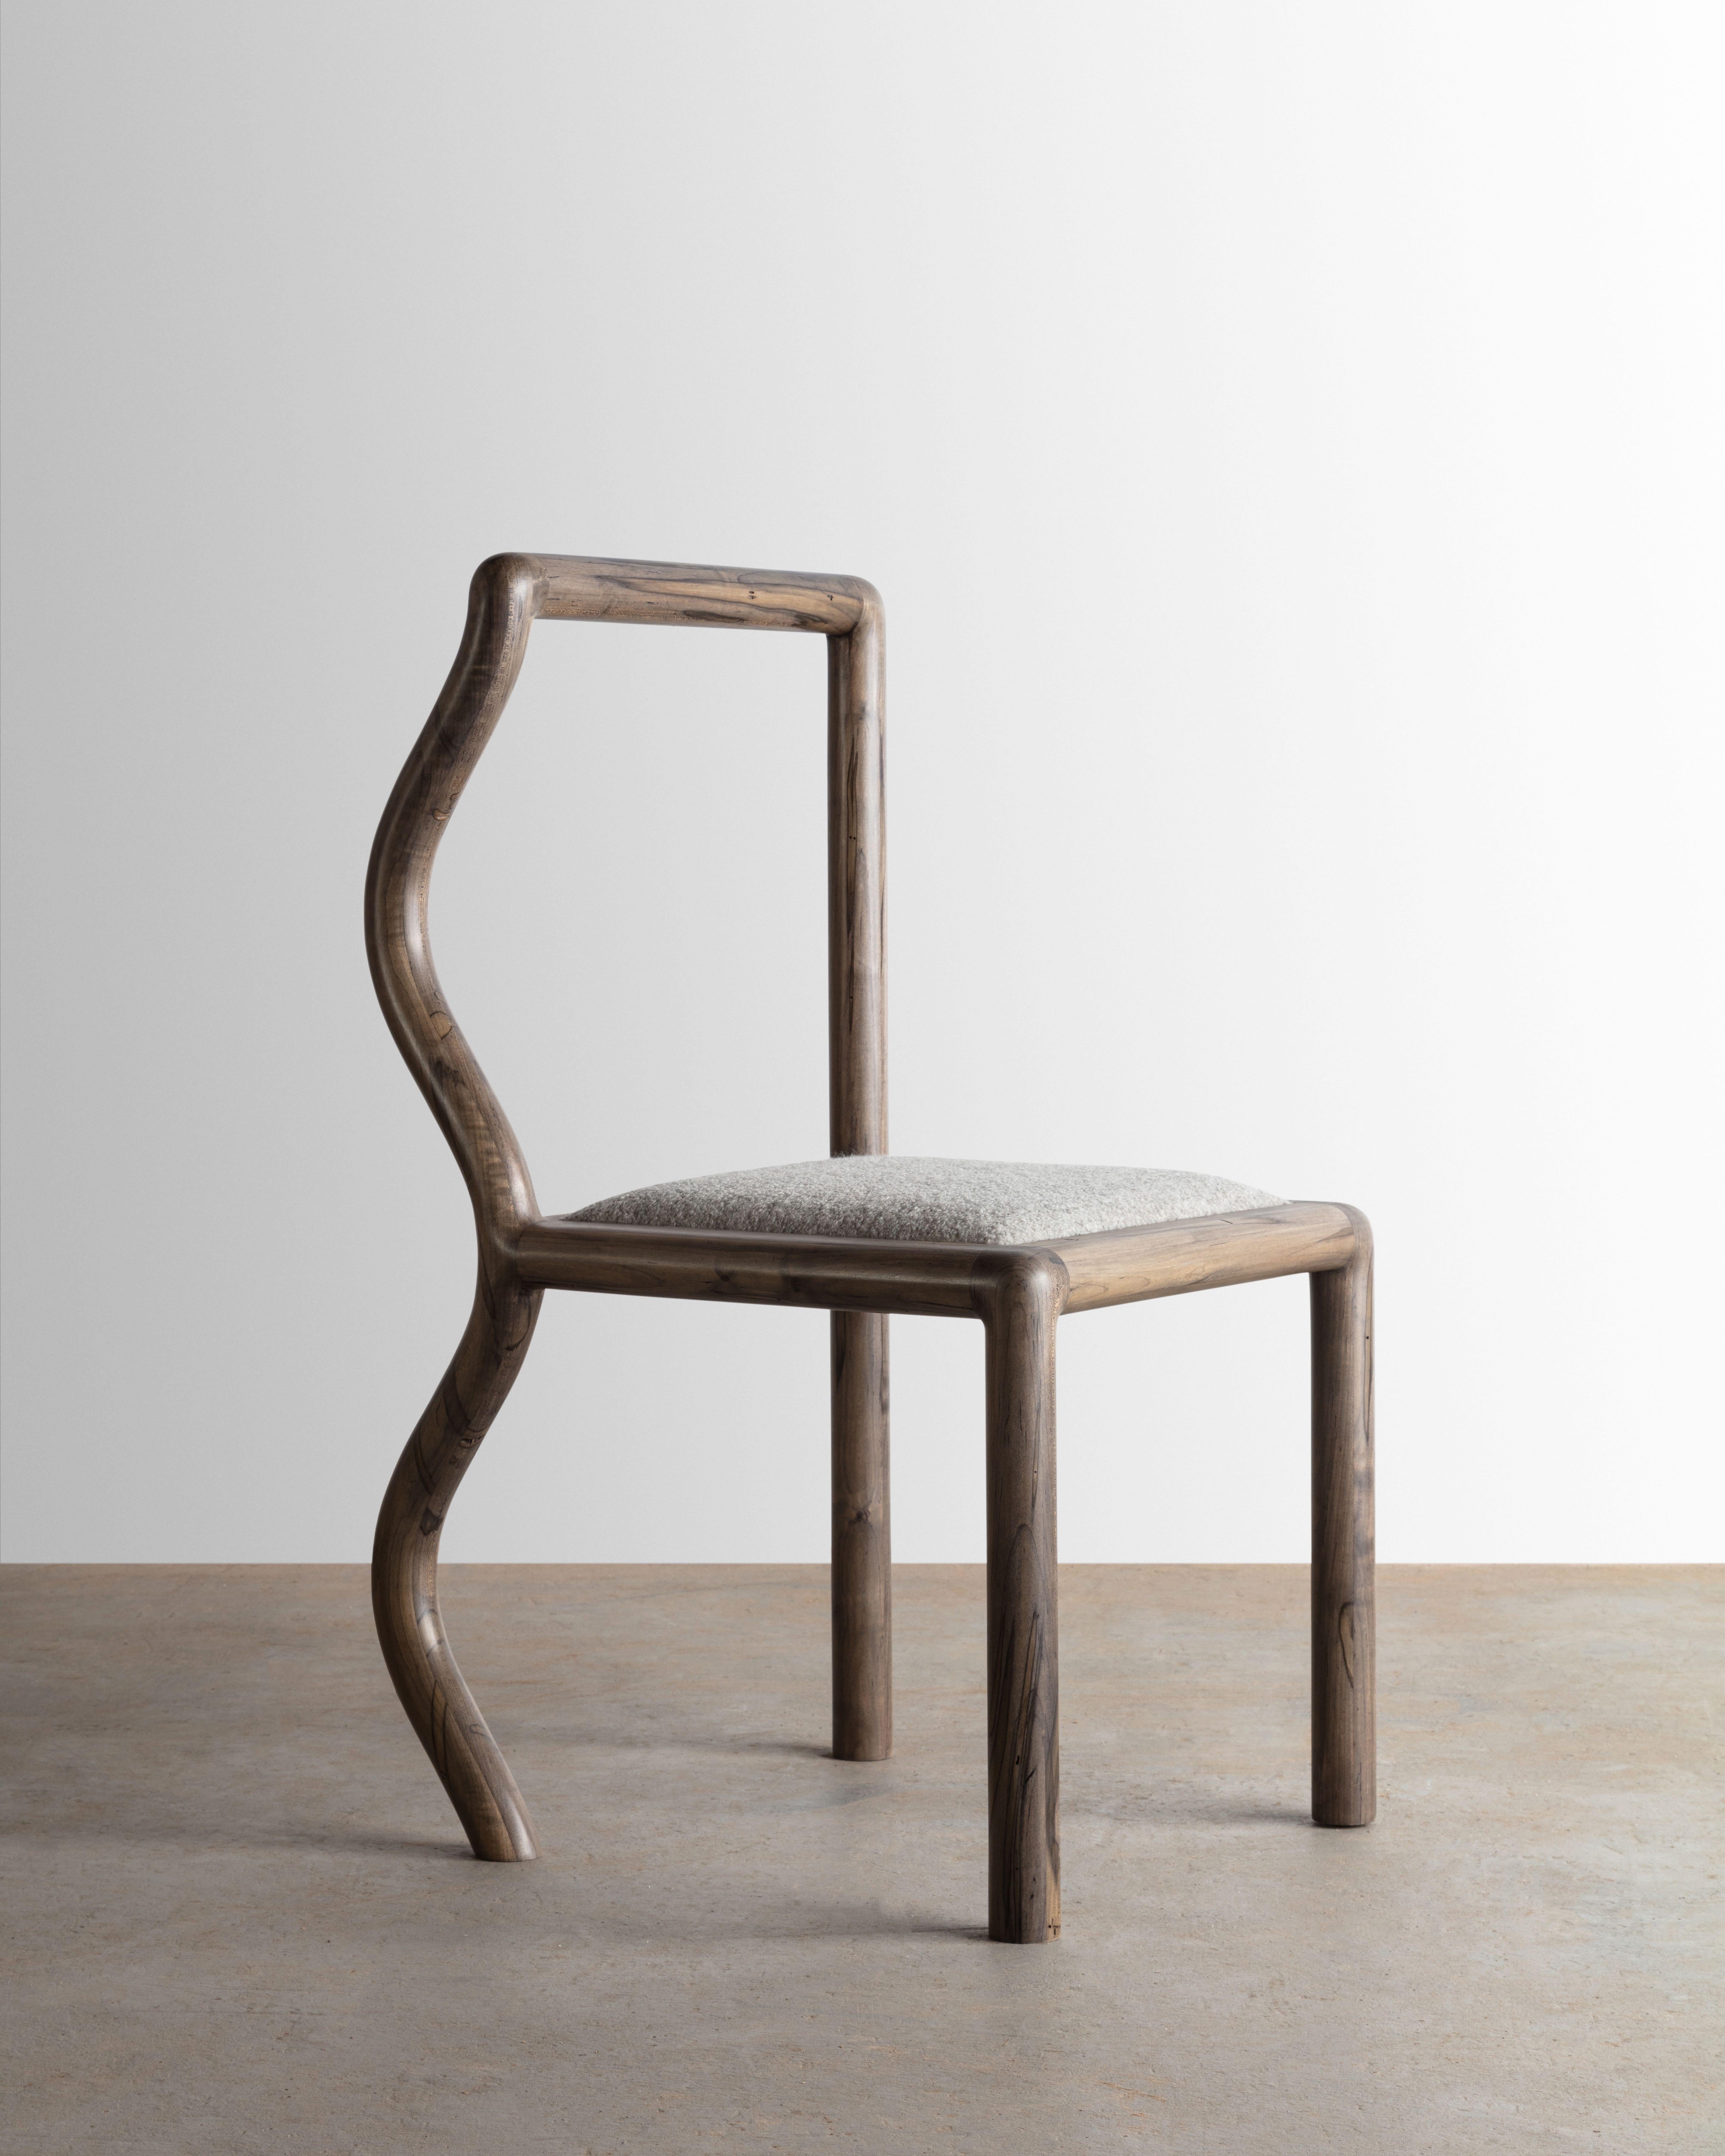 The Squiggle chair was created through an exploration of shaping solid slab lumber. Designed to bring a smile to any space, each chair part is thoughtfully selected to highlight the grain pattern and characteristics of wormy maple. The seat is